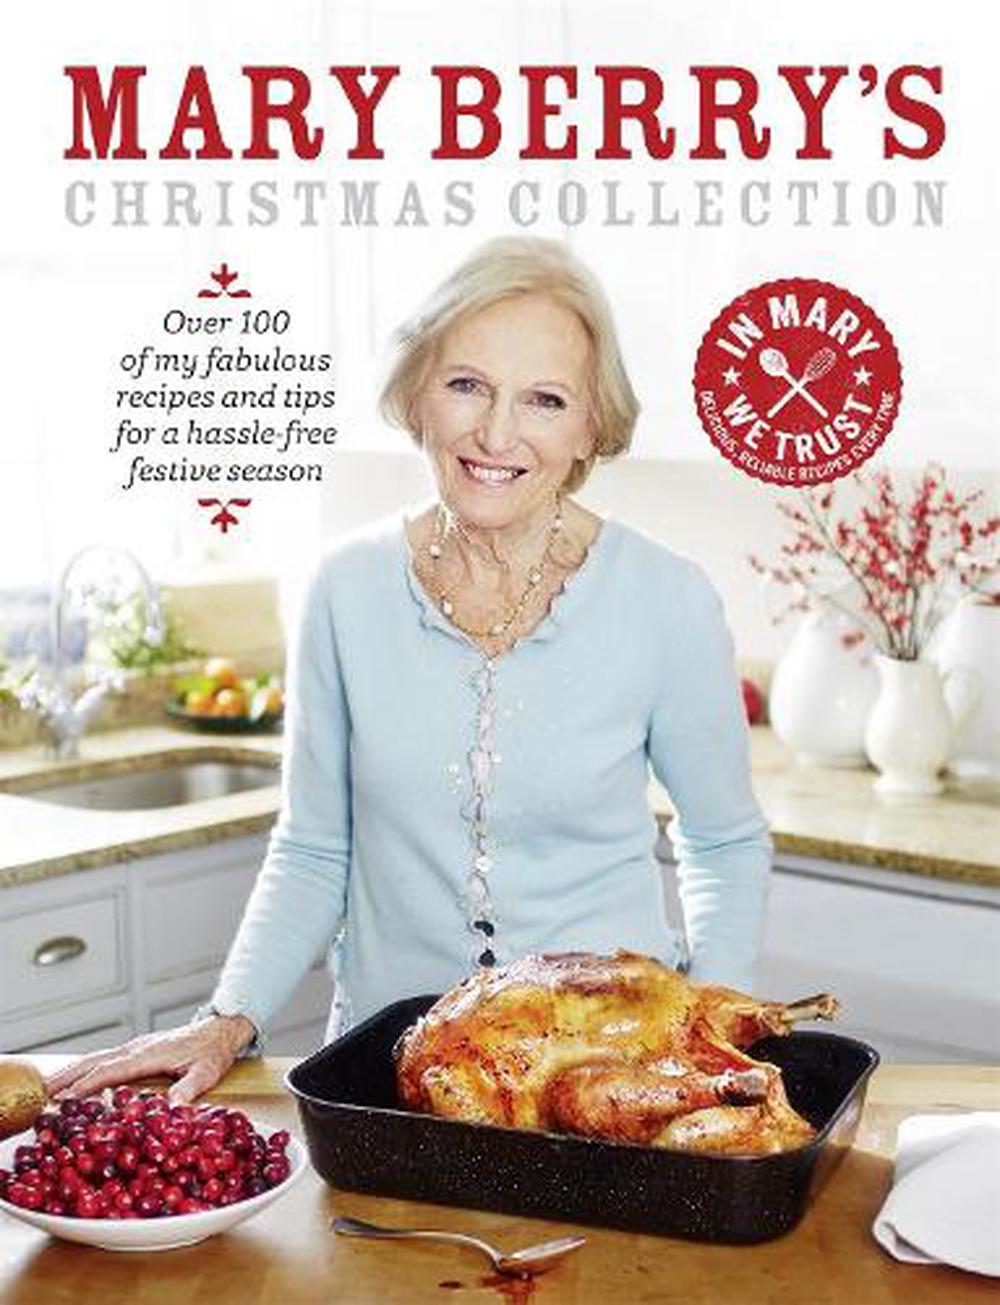 Mary Berry's Christmas Collection by Mary Berry, Hardcover